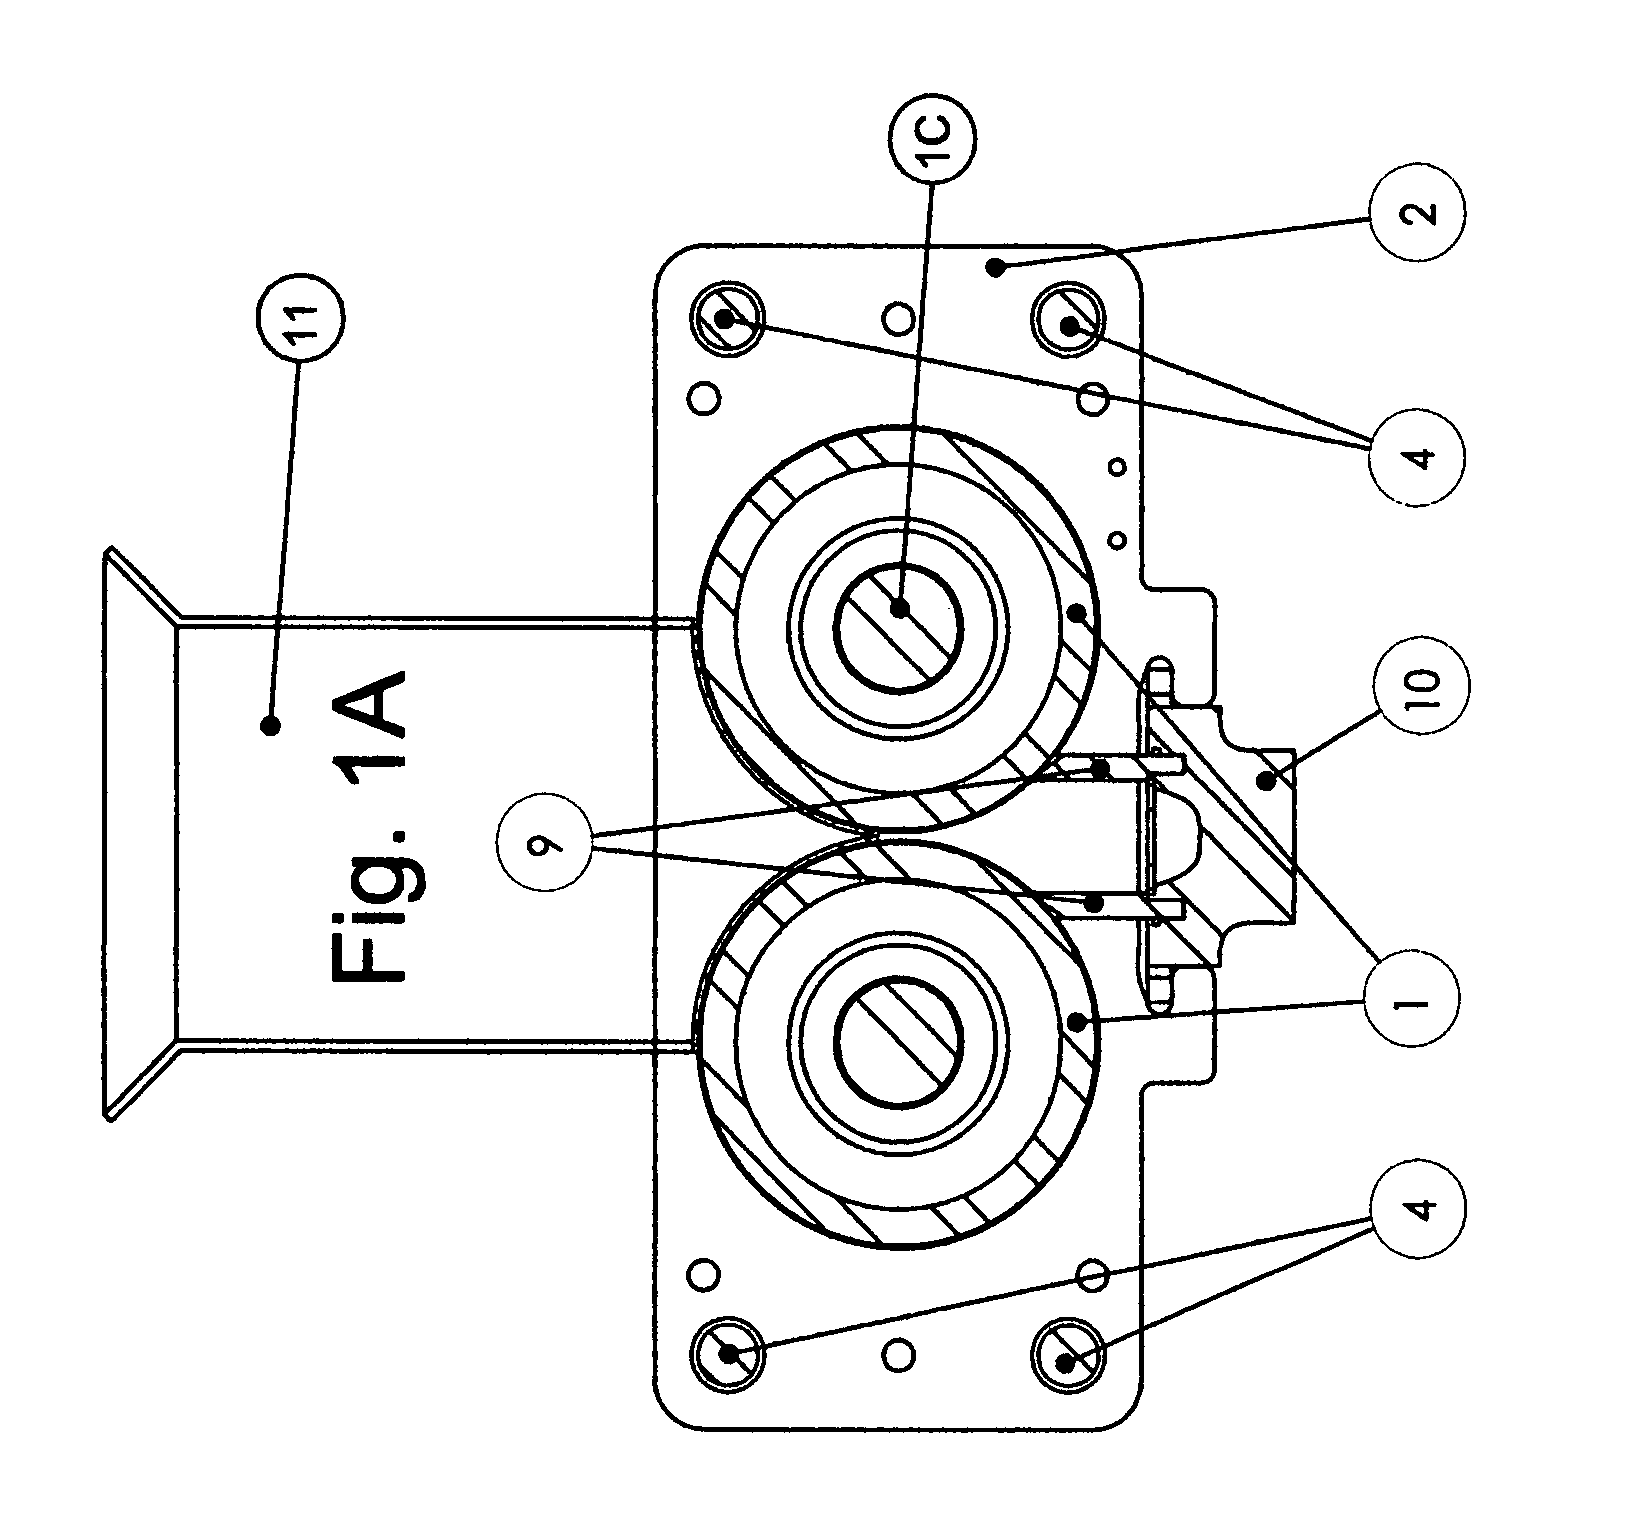 Device to allow for cleaning access in semi-solid metering machines